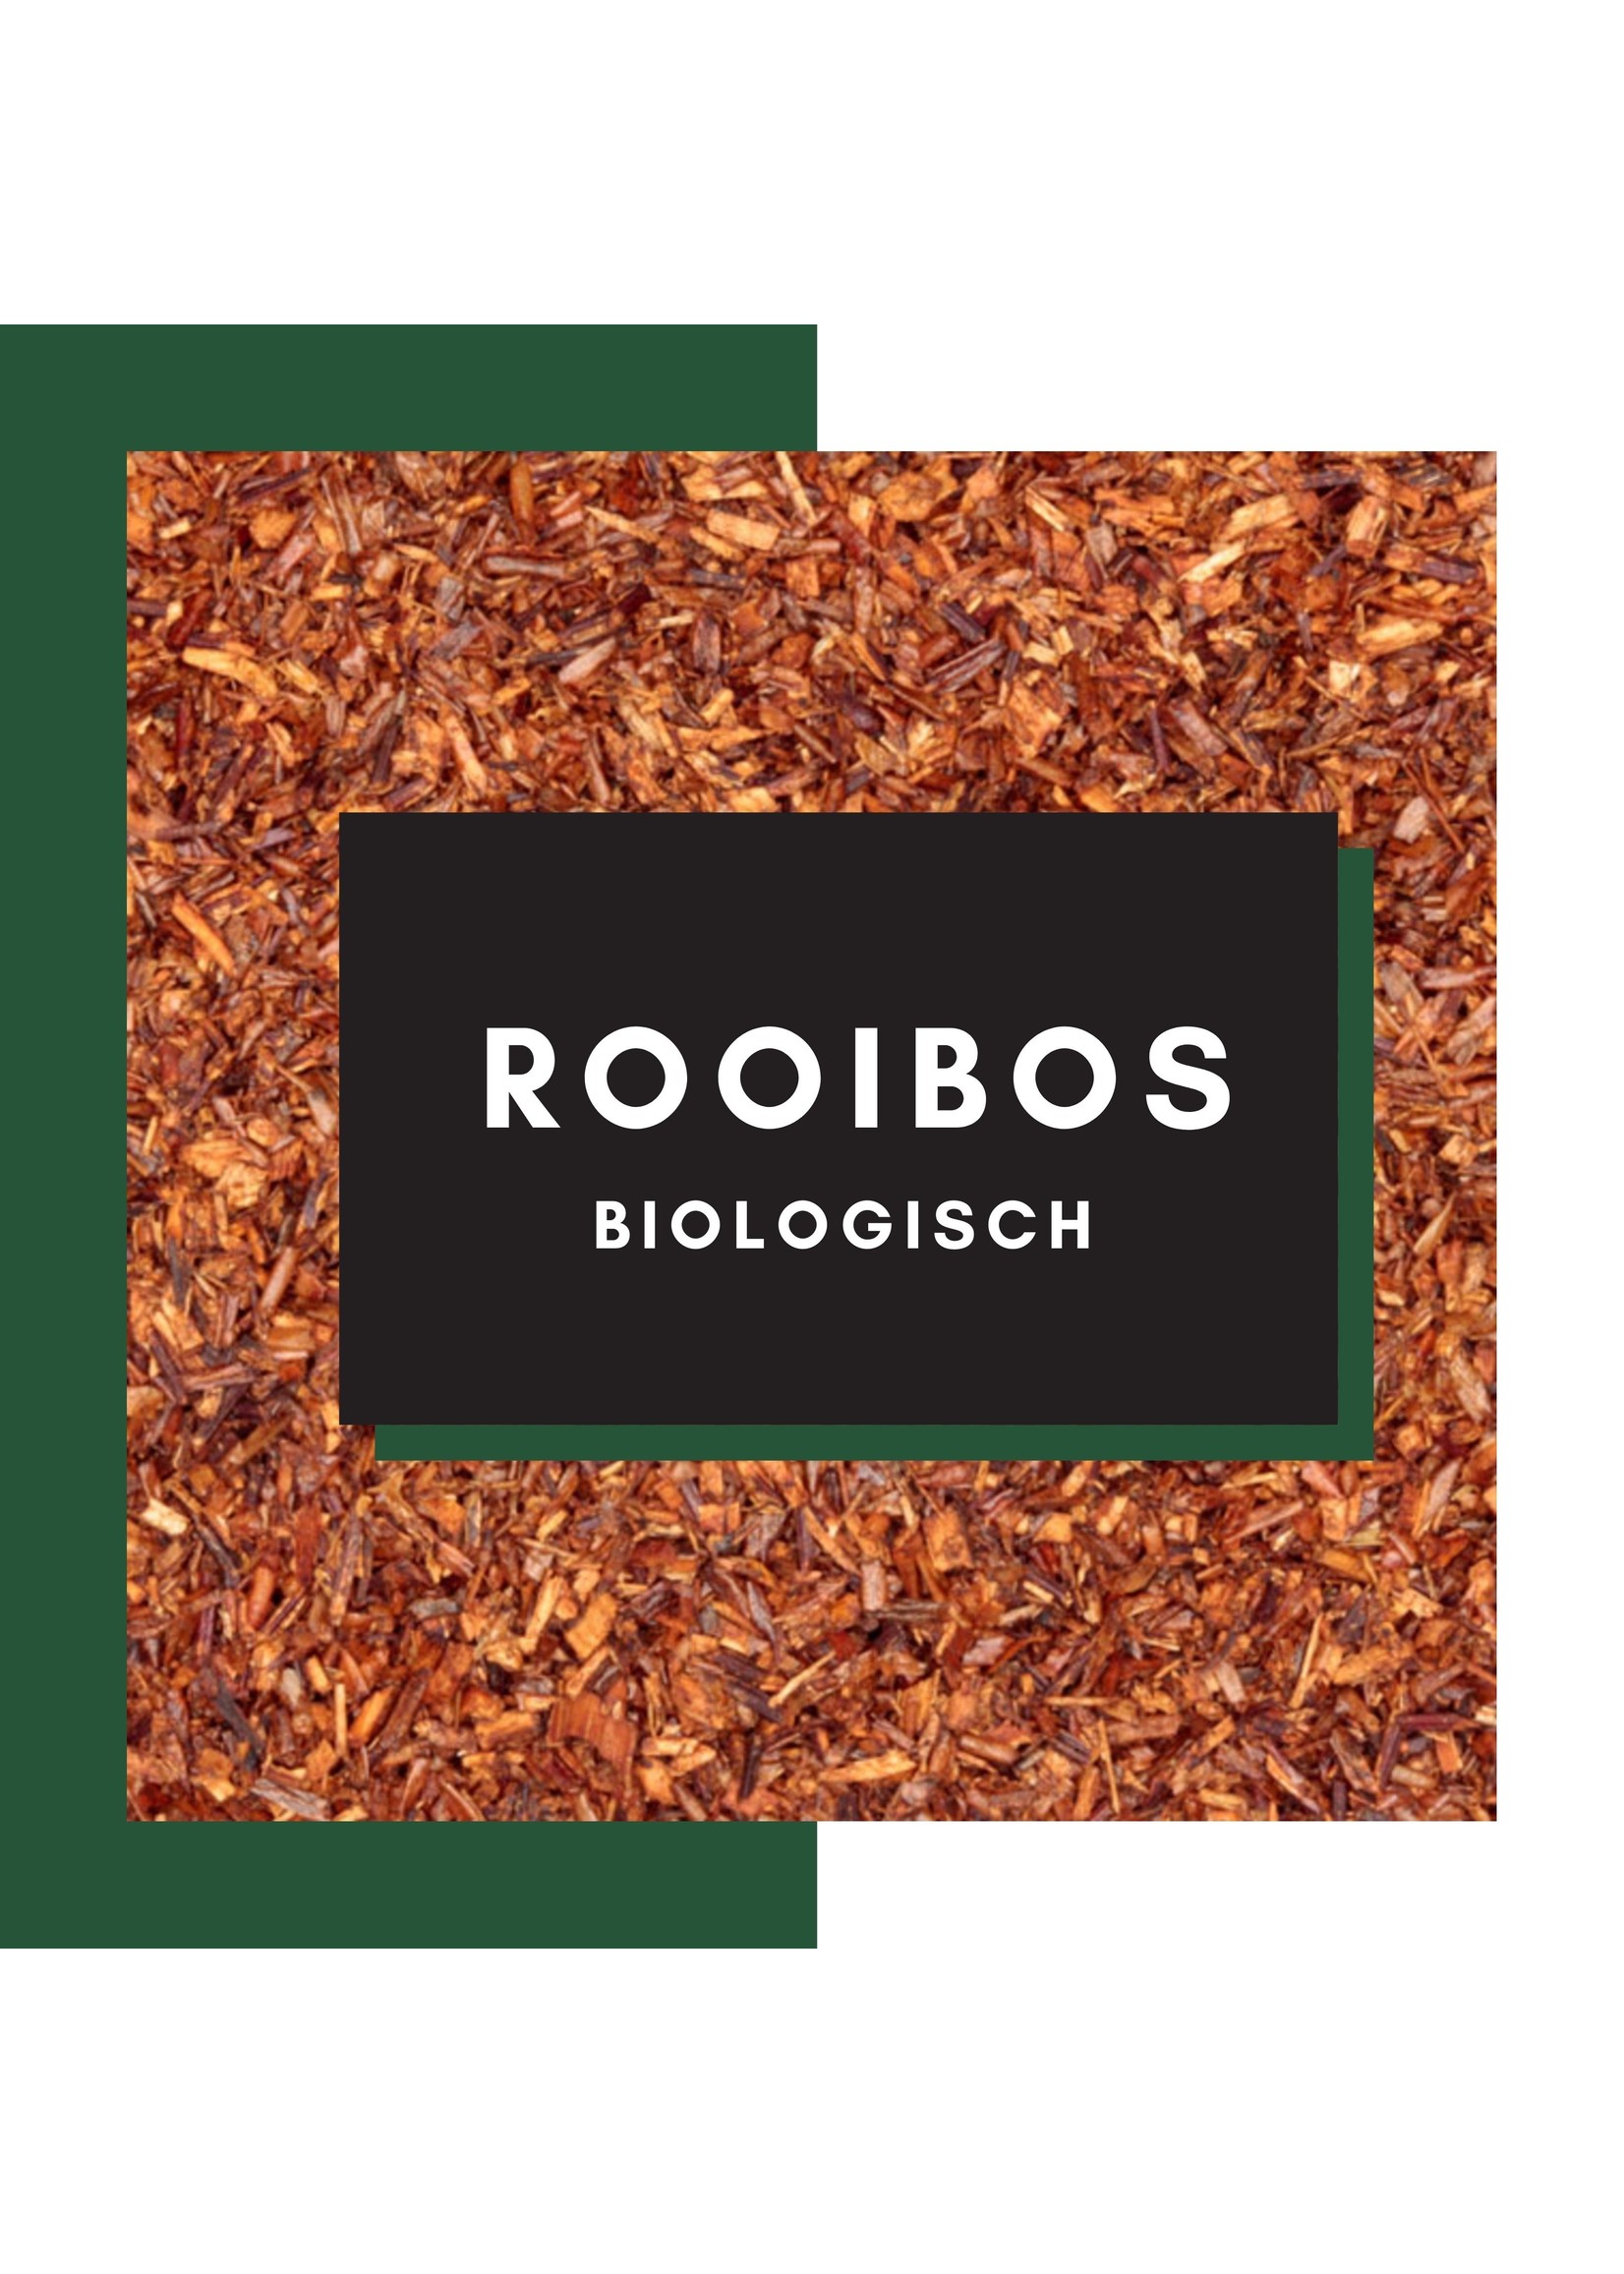 The Best of Nature Rooibos